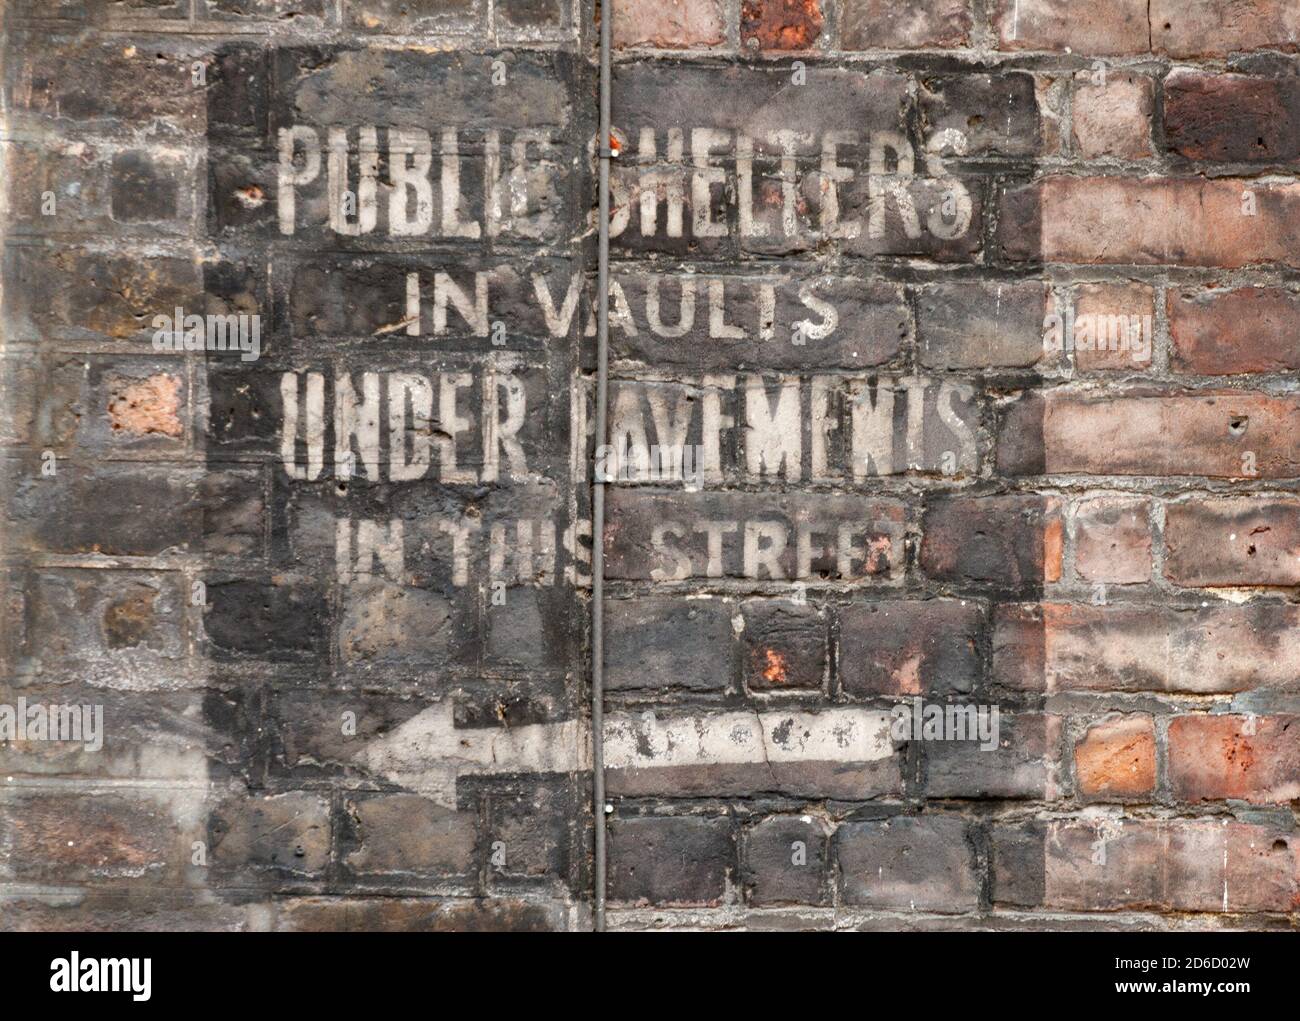 Faded painted sign on wall in Westminster dating from world war two saying public shelters in vaults under pavements in this street to show where air raid shelter is to get away from bombing during the blitz. 28 April 2009. Photo: Neil Turner Stock Photo